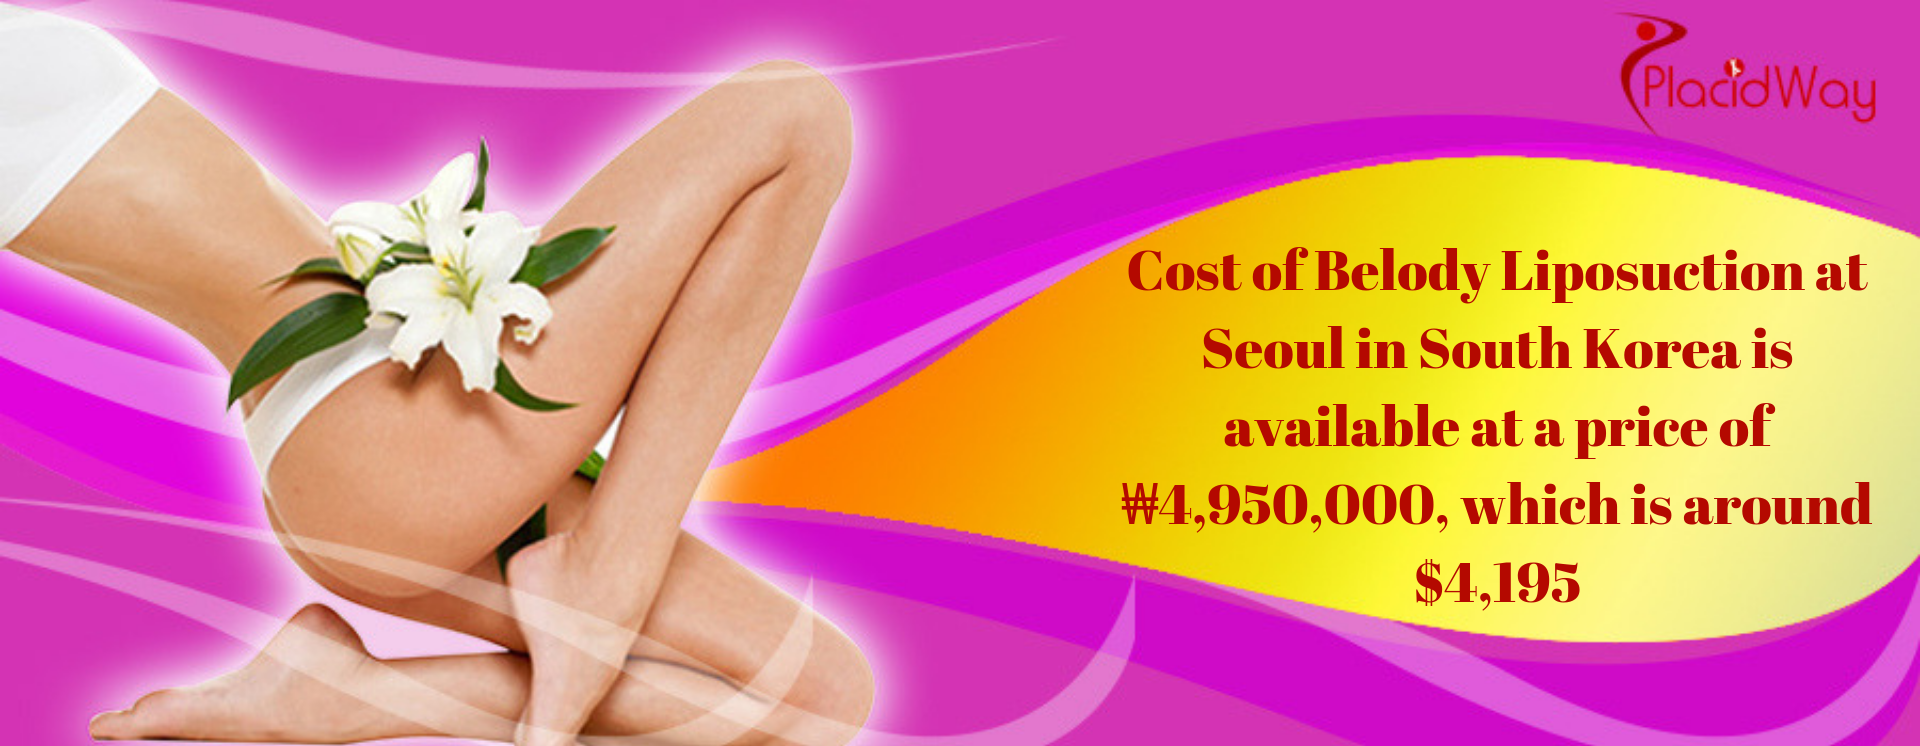 Cost of Belody Liposuction at Seoul in South Korea is available at a price of ₩4,950,000, which is around $4,195